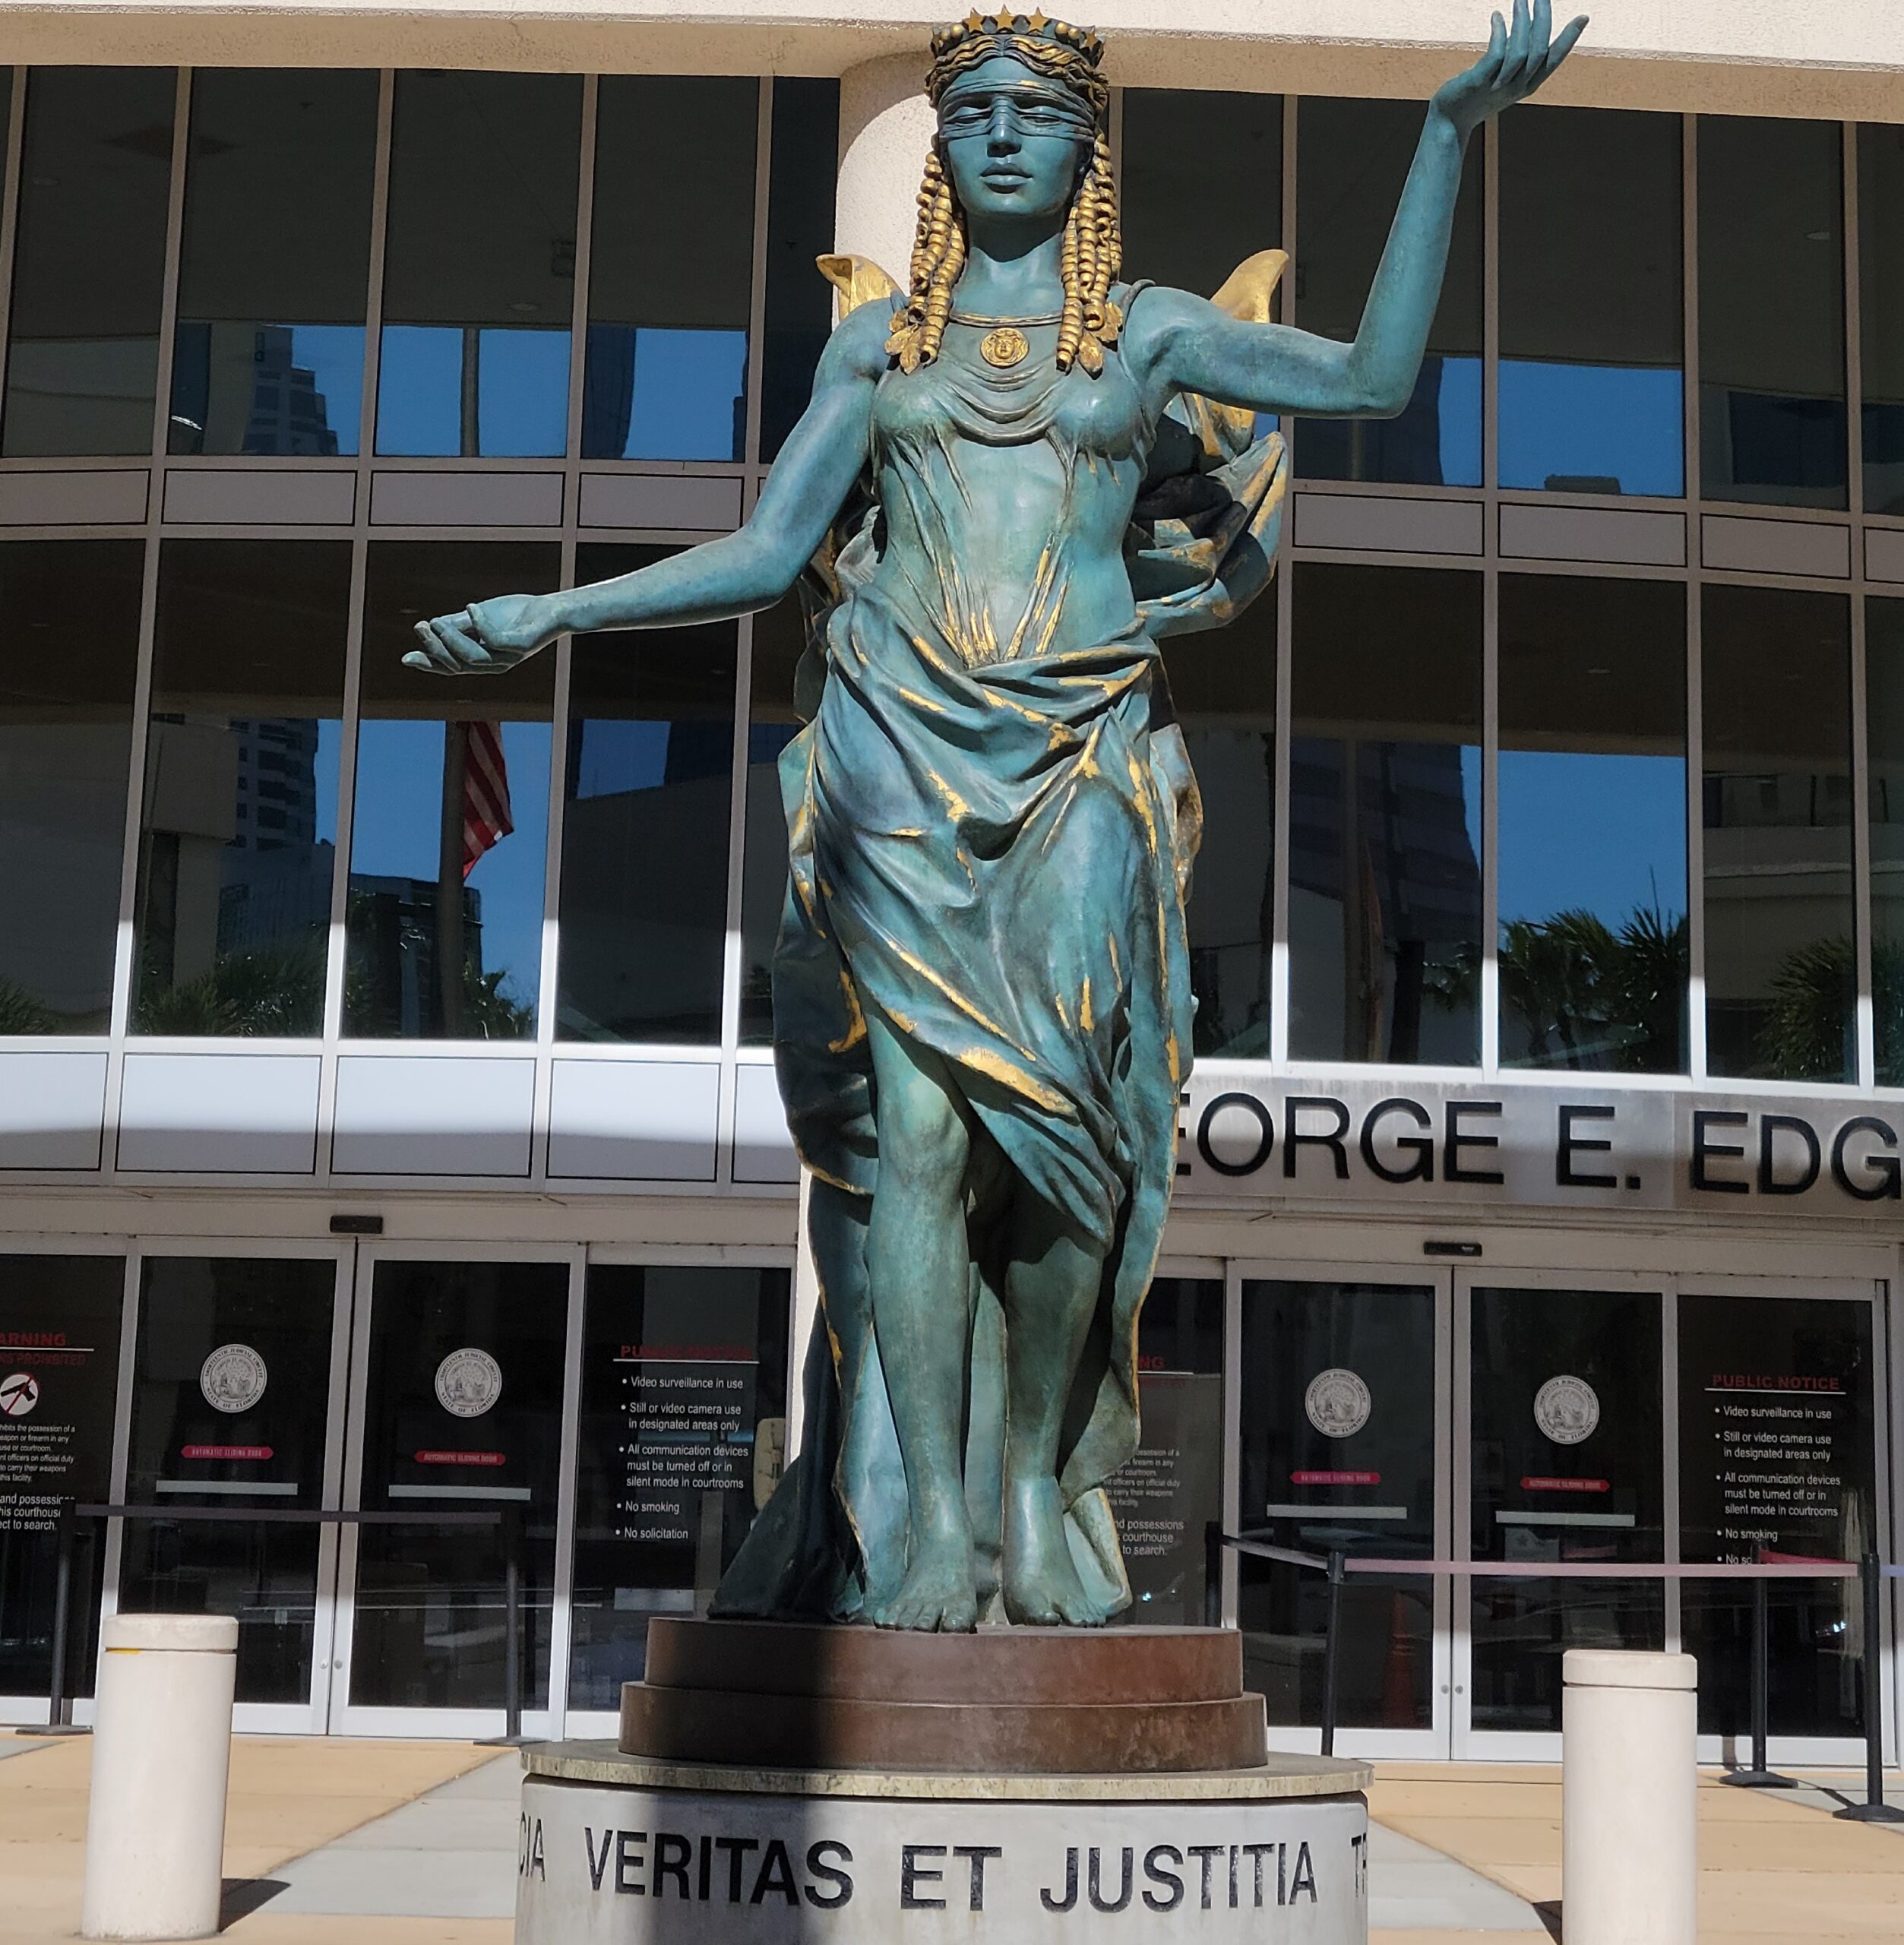 Statue of Veritas in front of Hillsborough County Courthouse, Tampa, Fla.